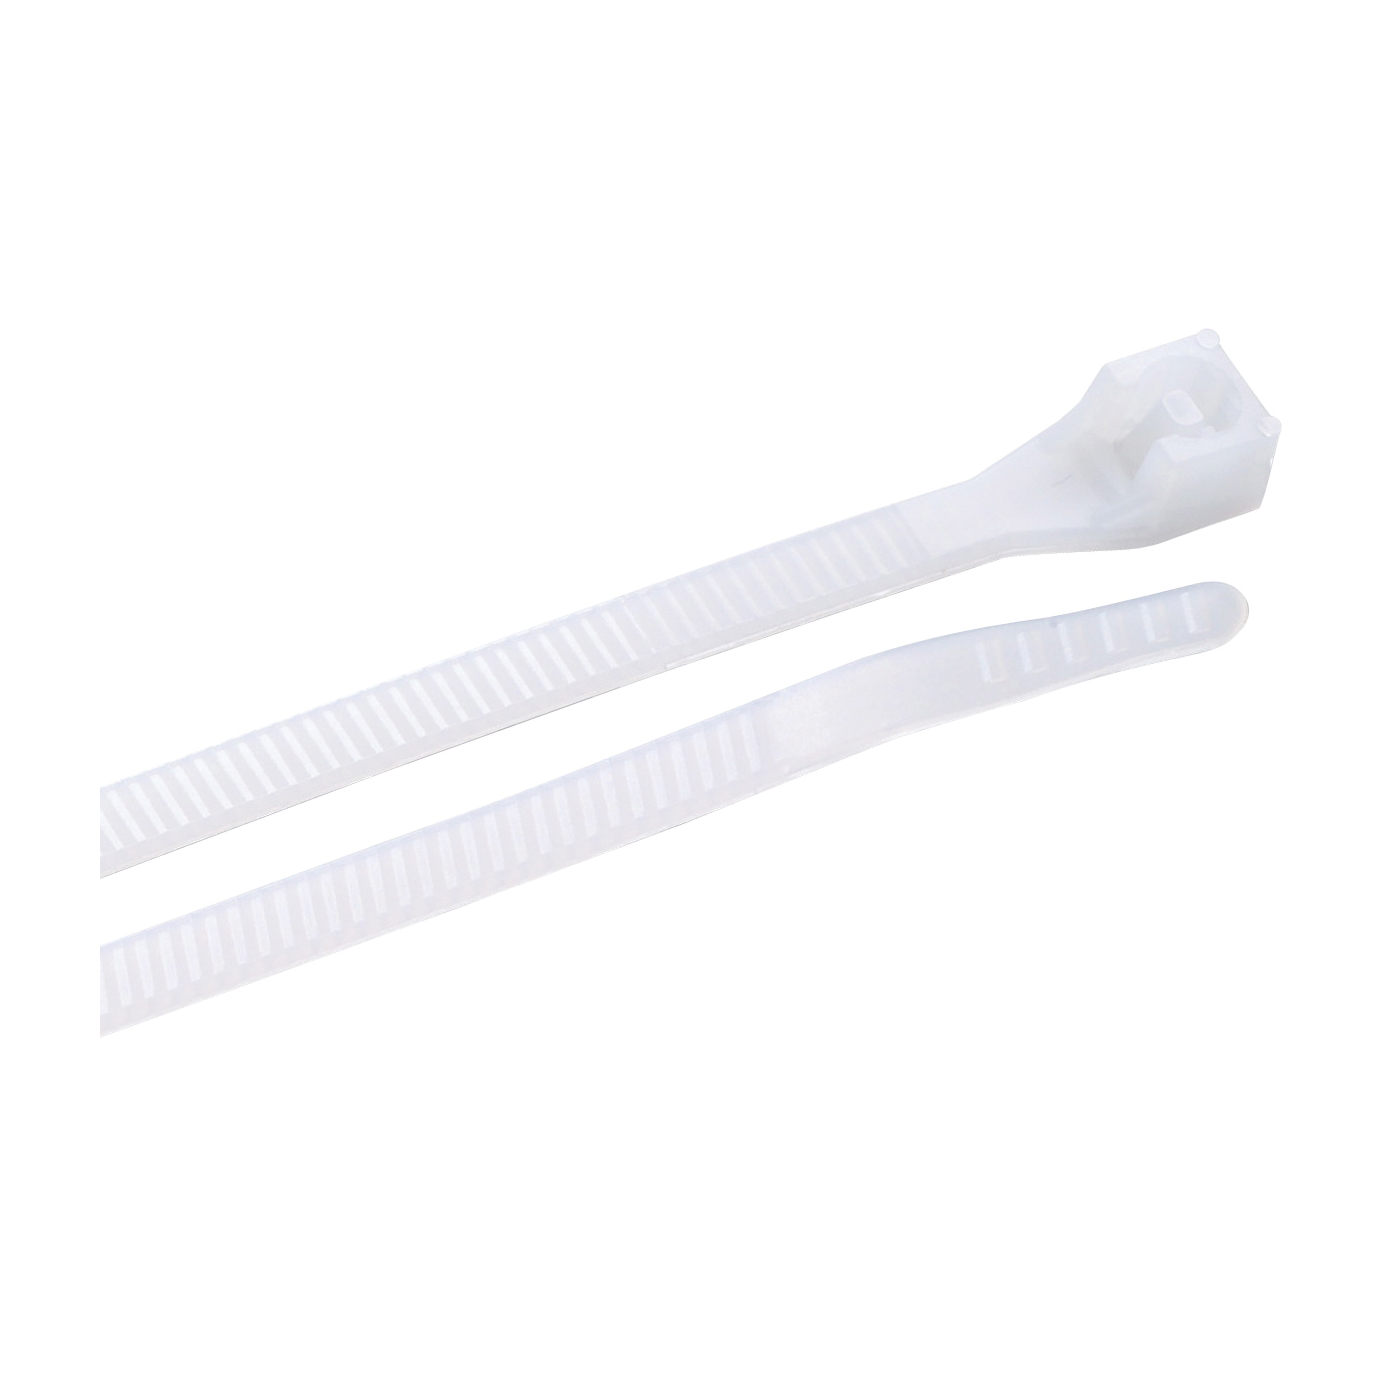 46-308  8 in. Cable Tie, Double-Lock Locking, 6/6 Nylon, Natural, 100 pk